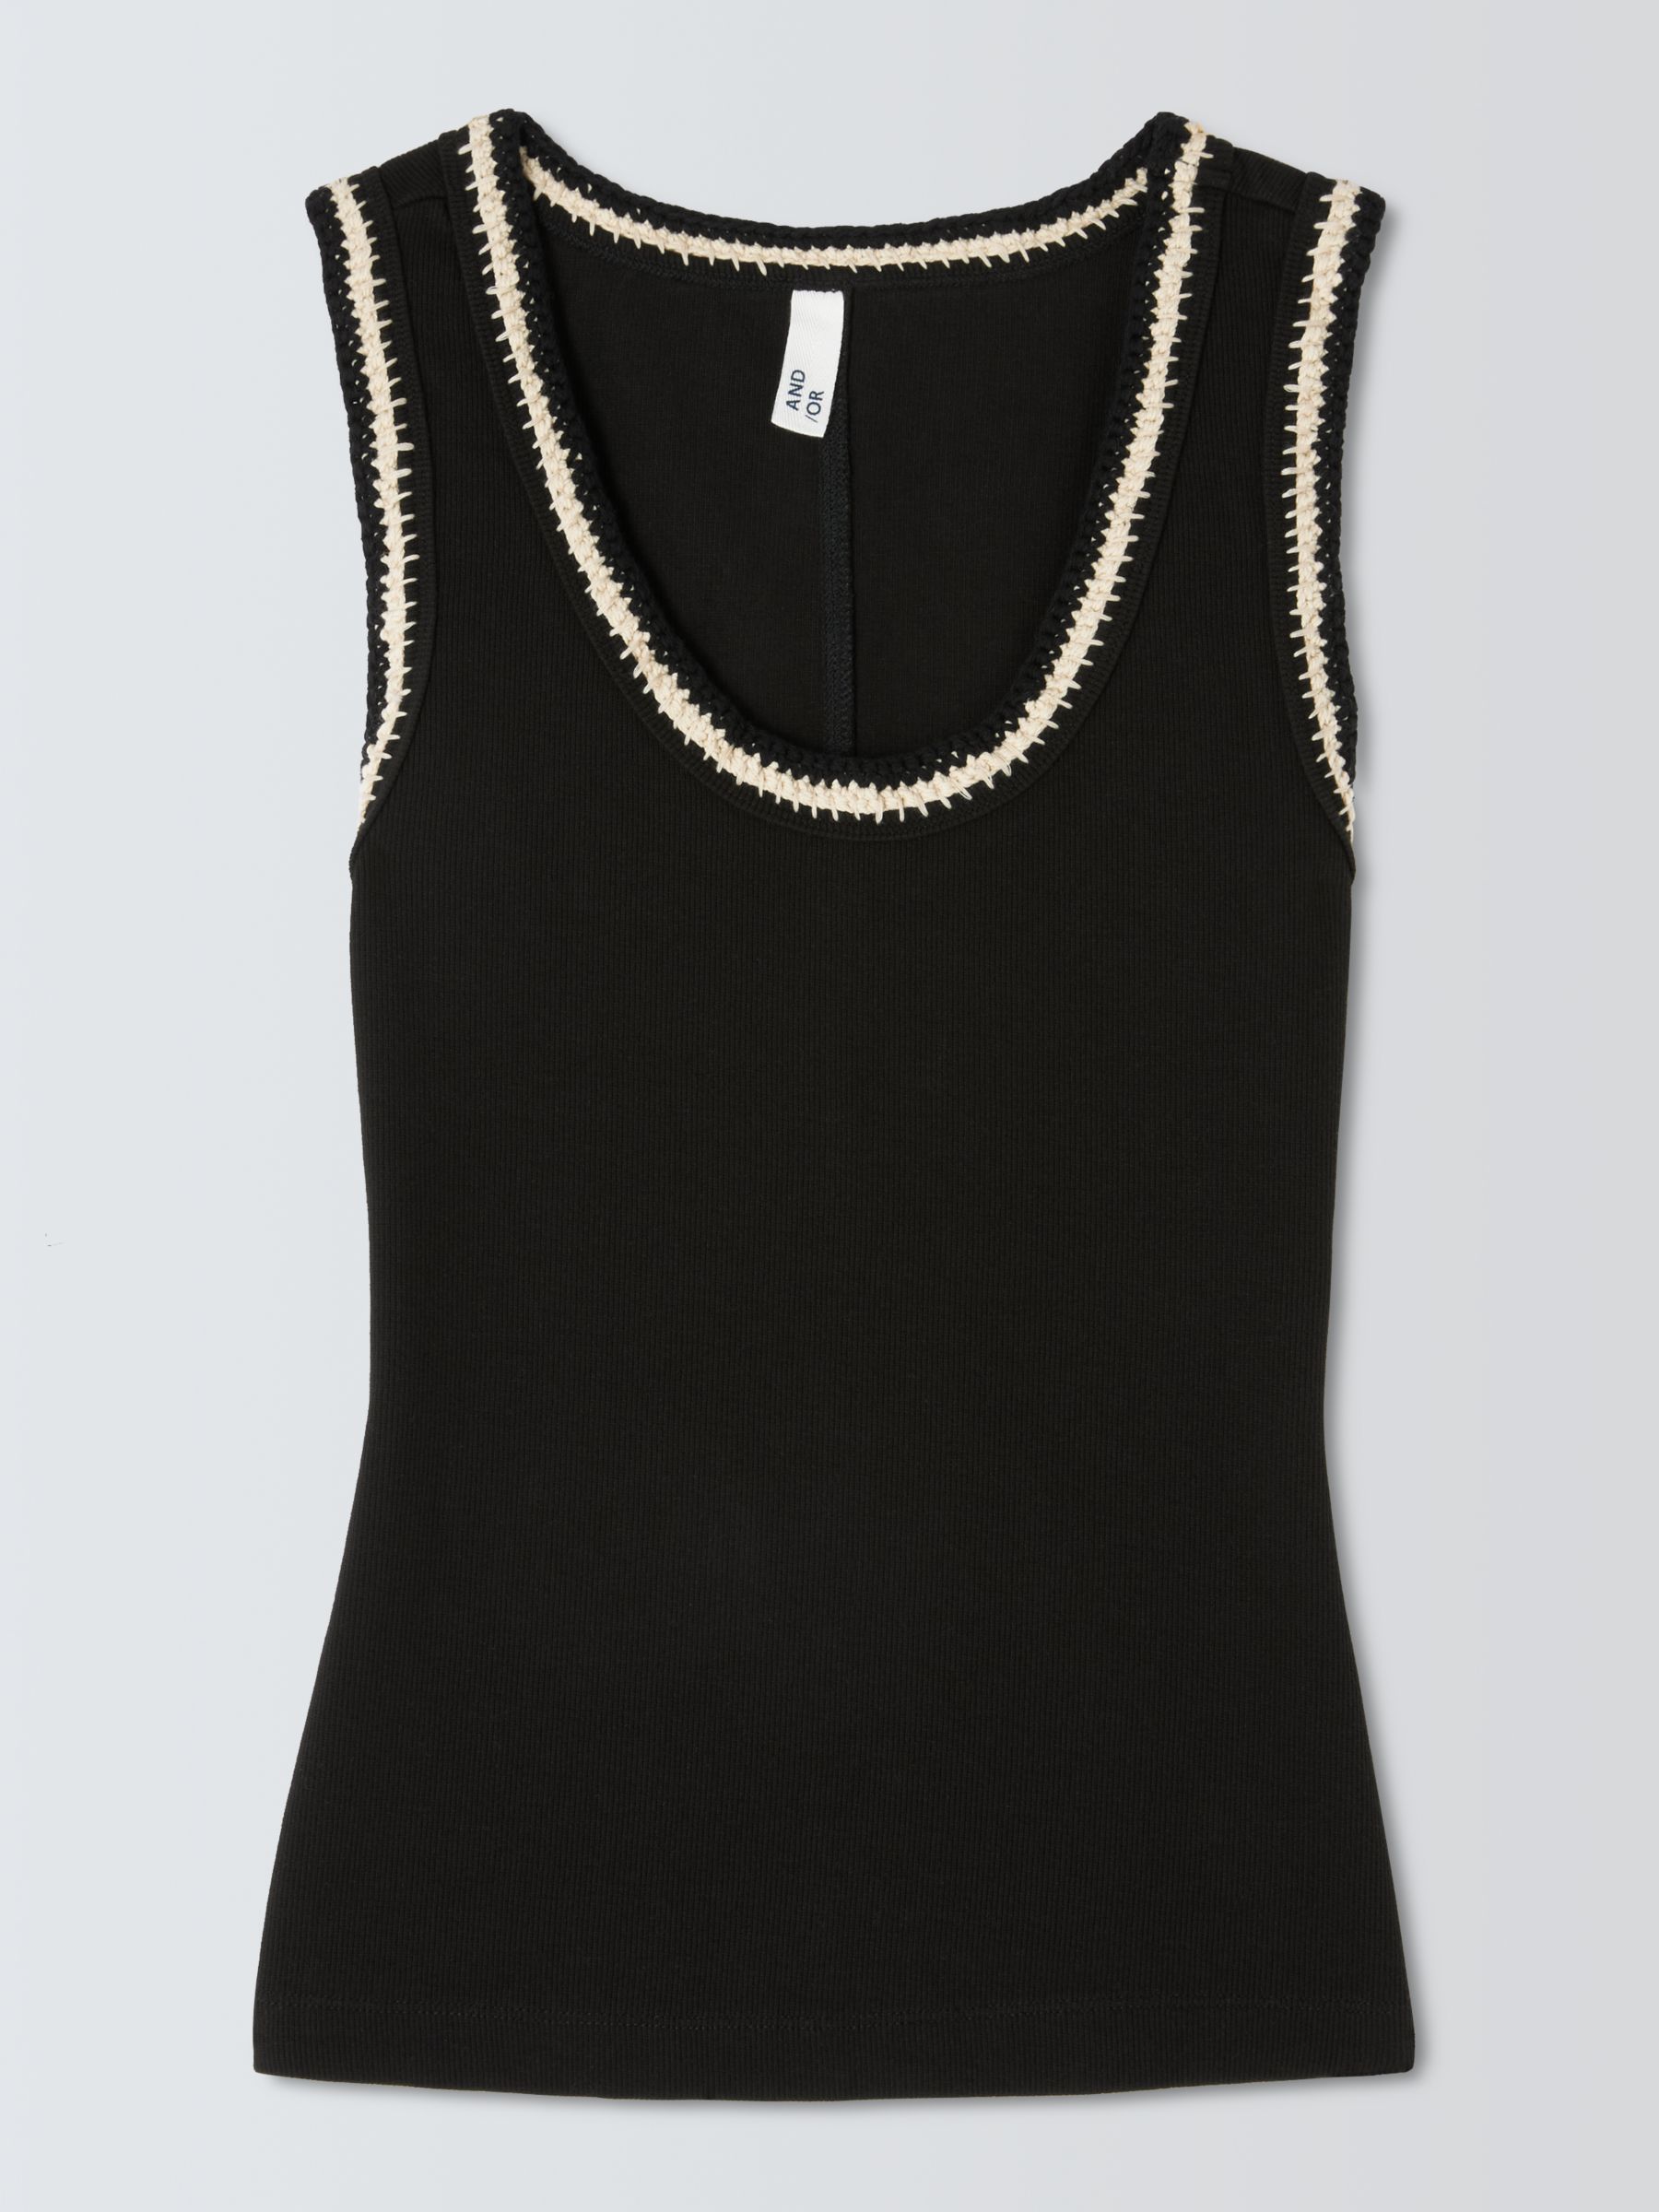 AND/OR Dari Embroidered Vest Top, Black, 6